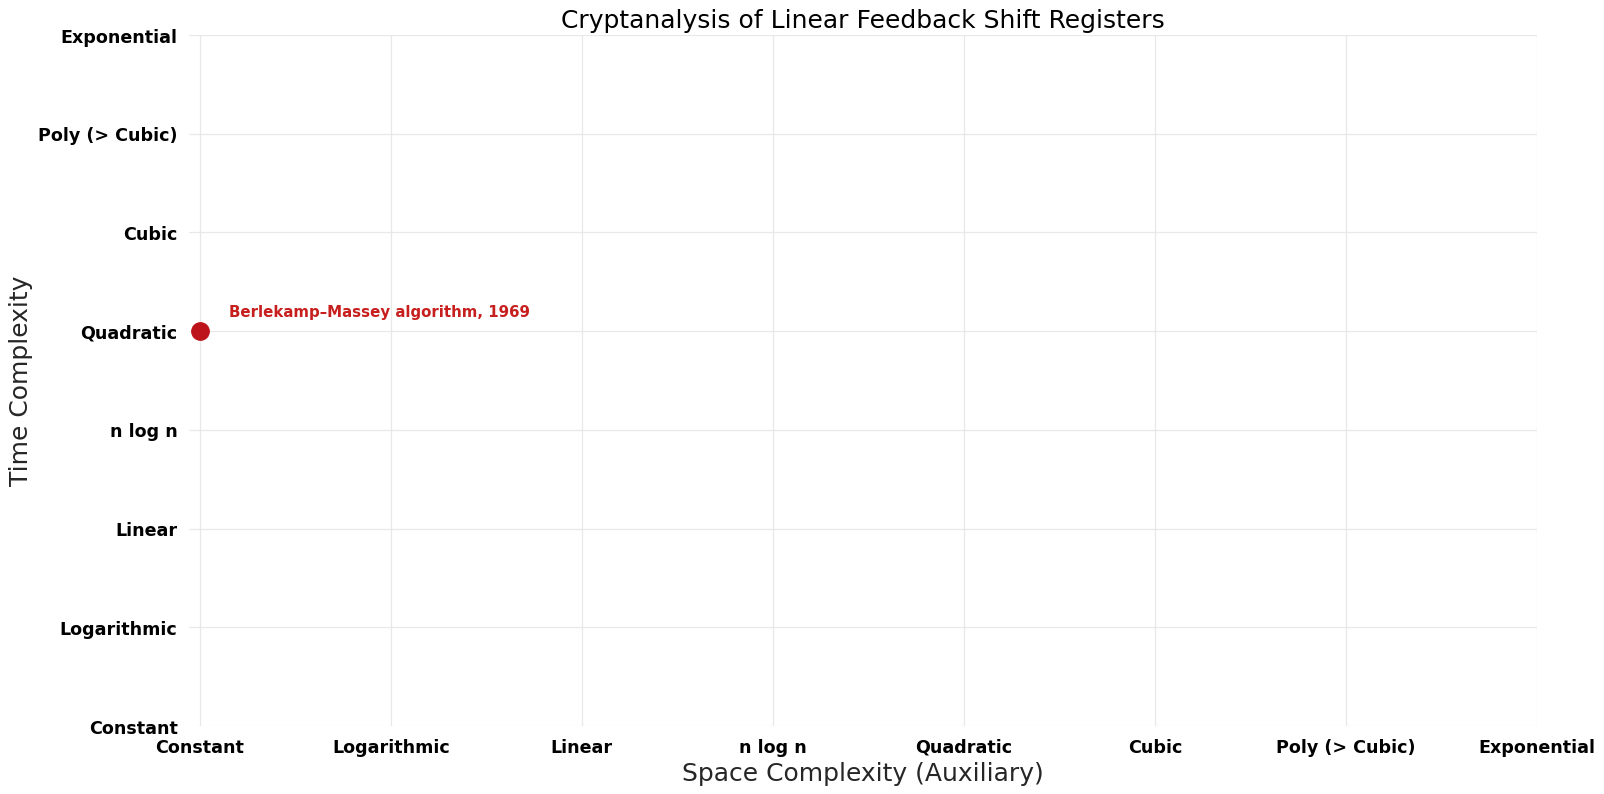 Cryptanalysis of Linear Feedback Shift Registers - Pareto Frontier.png